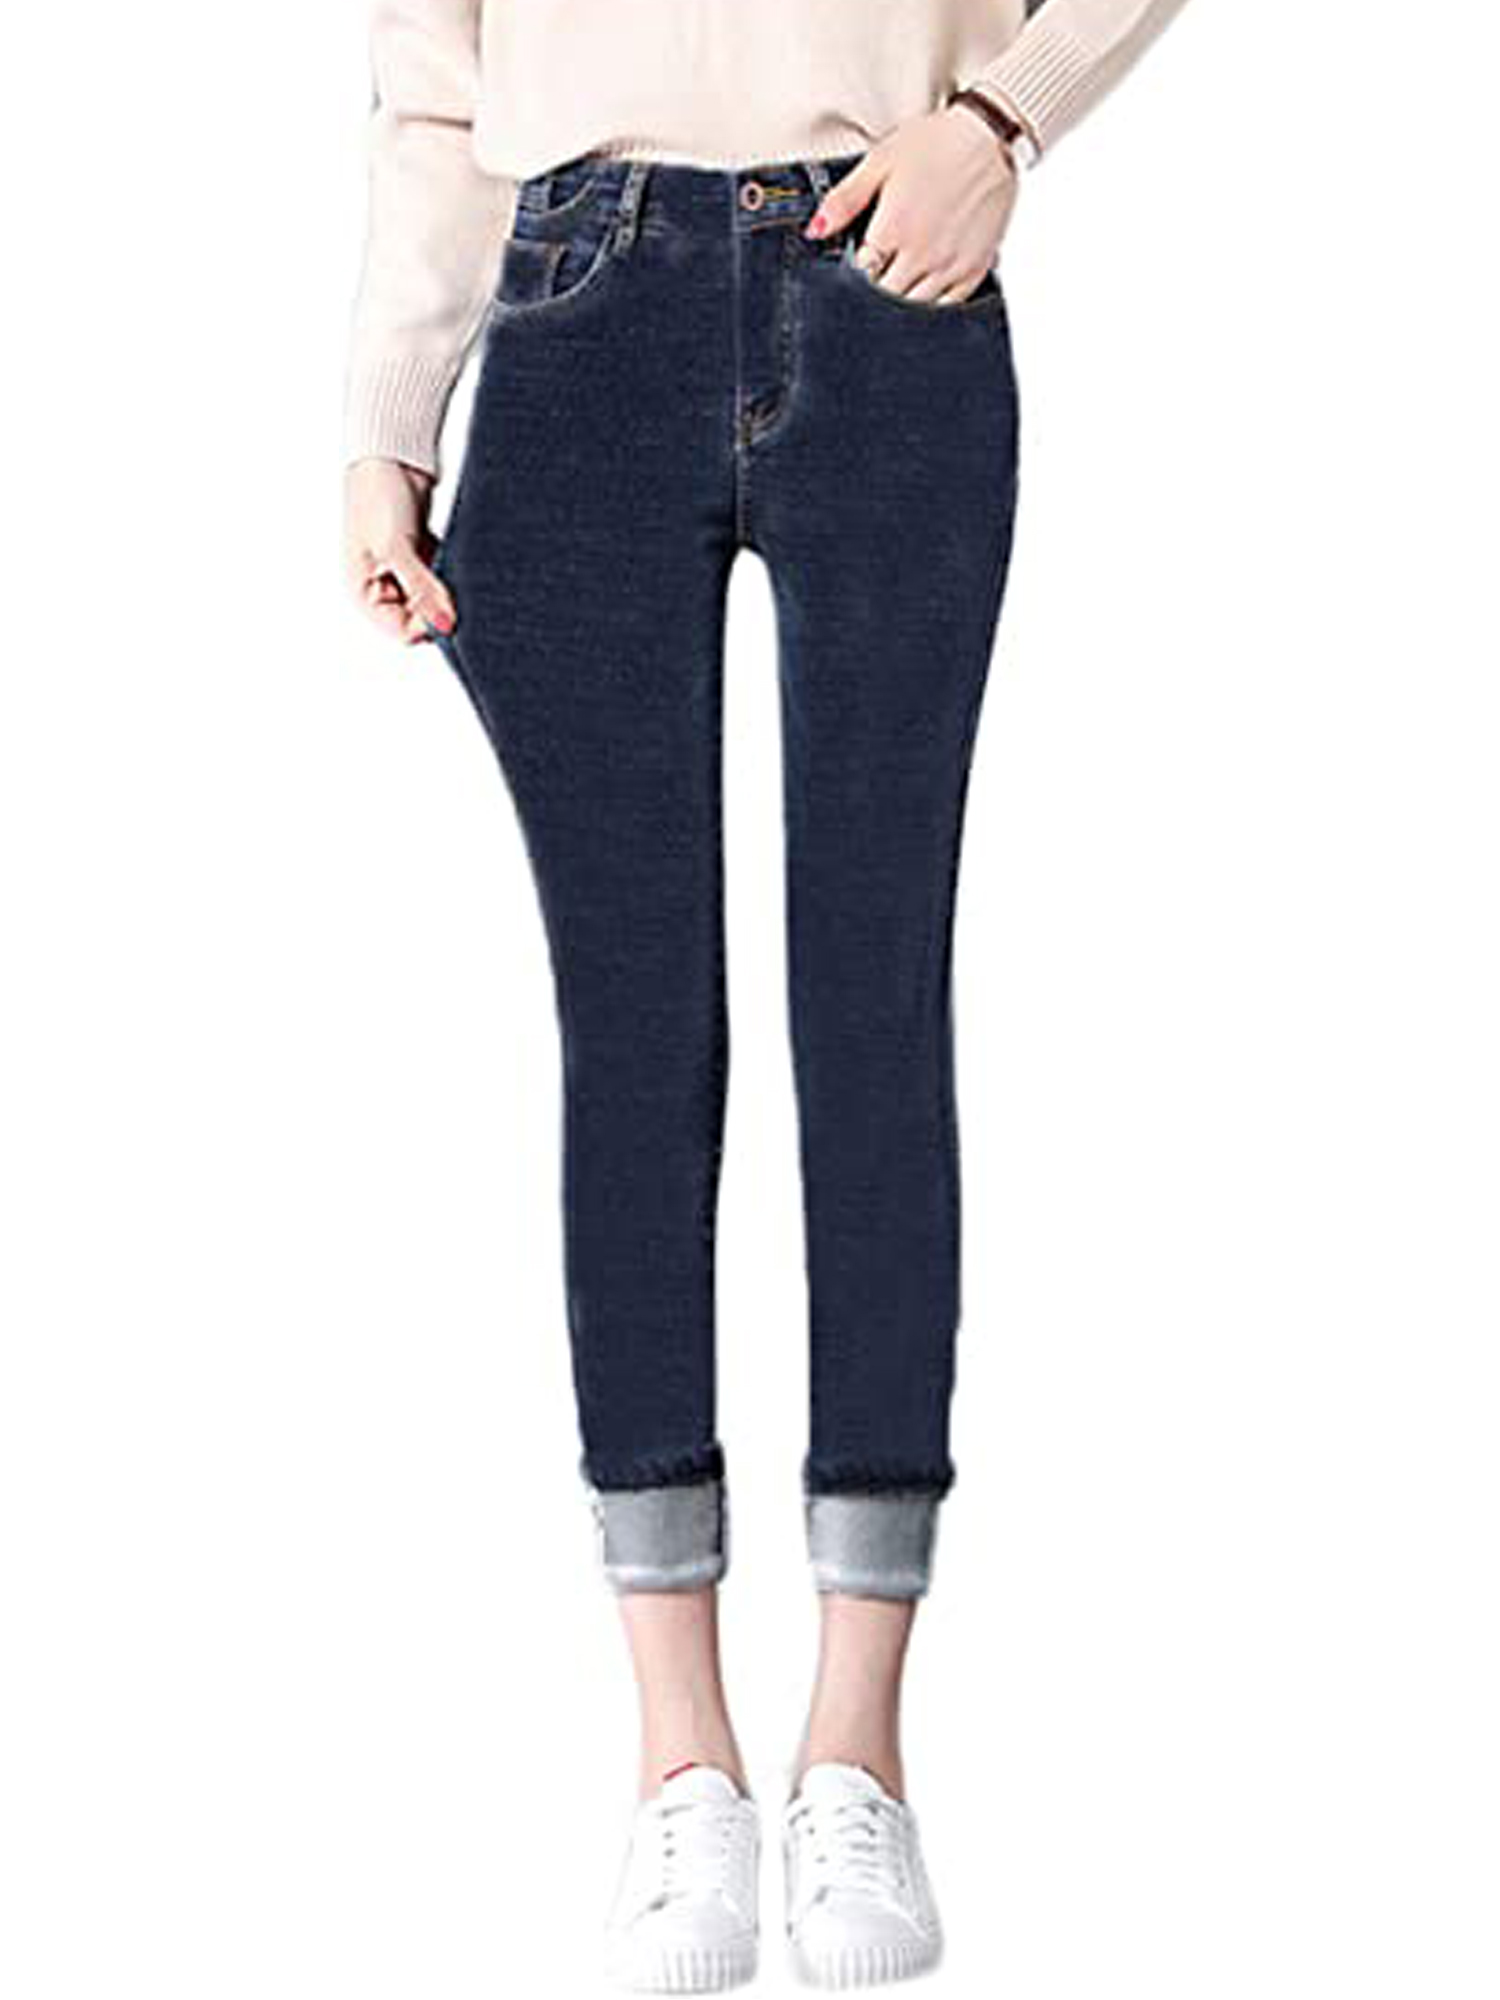 JBEELATE Women's Fleece Lined Jeans Stretchy Skinny Denim Pants with Pockets - image 1 of 6